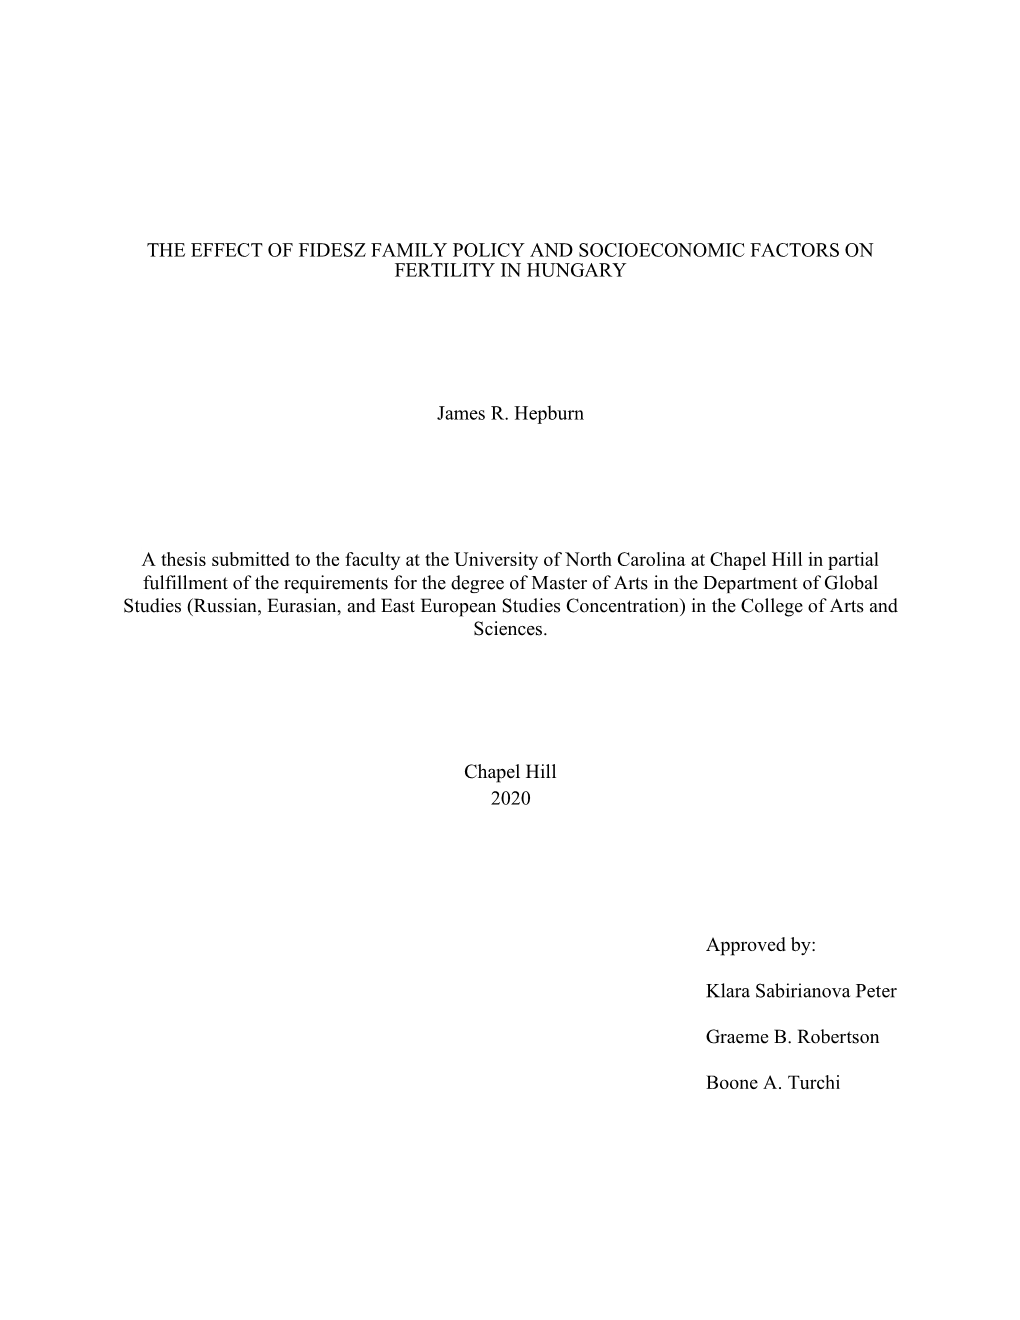 THE EFFECT of FIDESZ FAMILY POLICY and SOCIOECONOMIC FACTORS on FERTILITY in HUNGARY James R. Hepburn a Thesis Submitted To